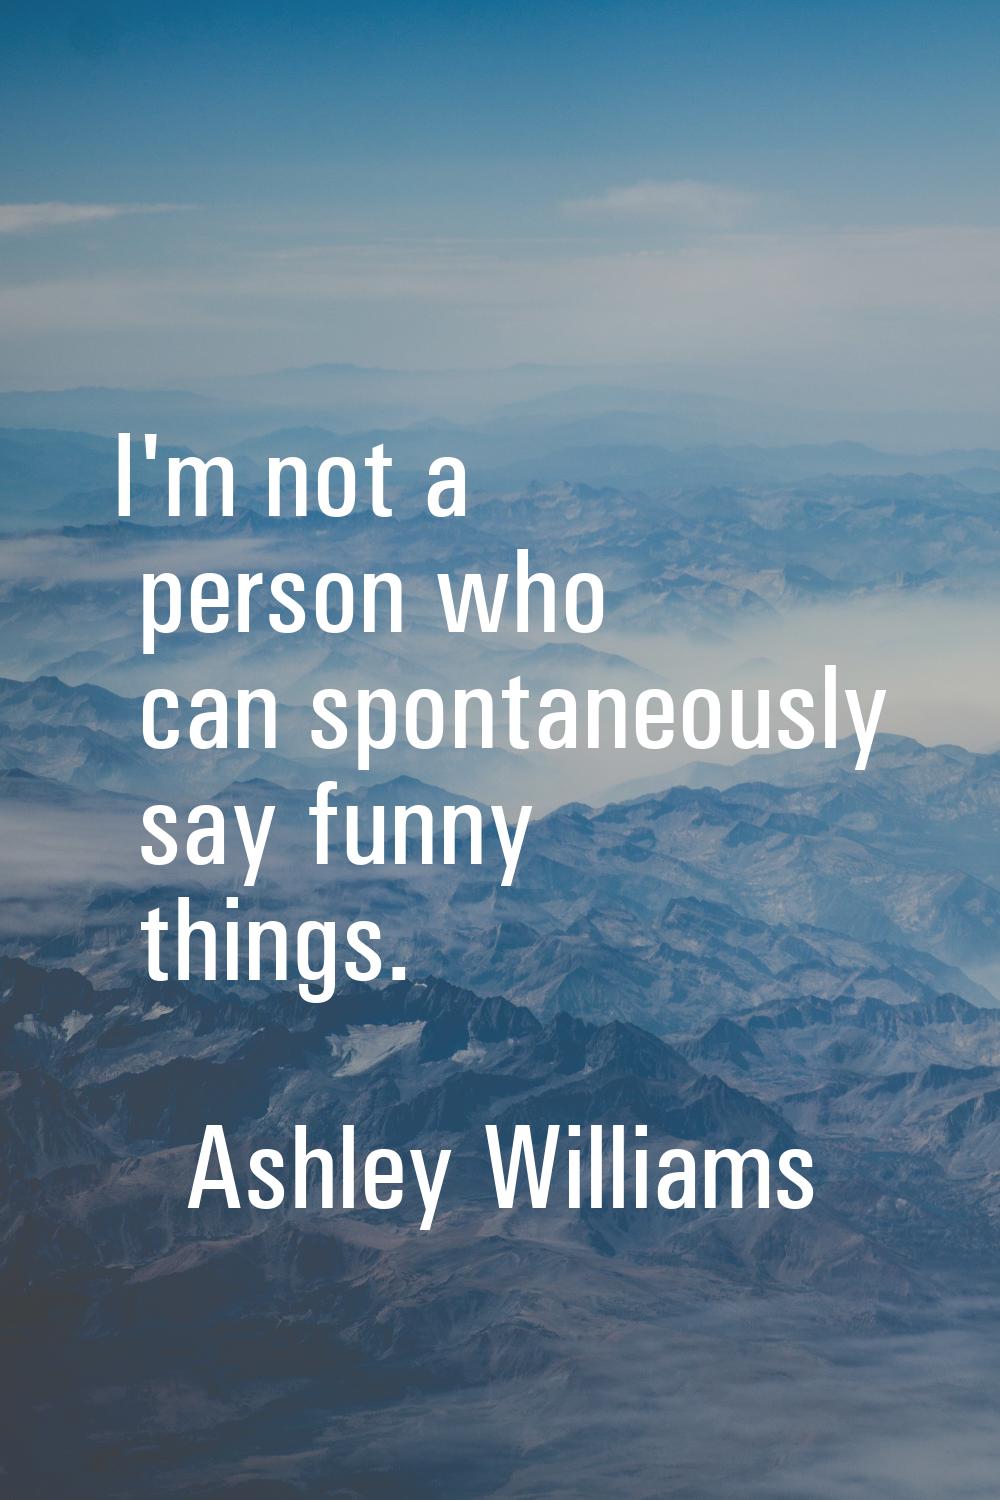 I'm not a person who can spontaneously say funny things.